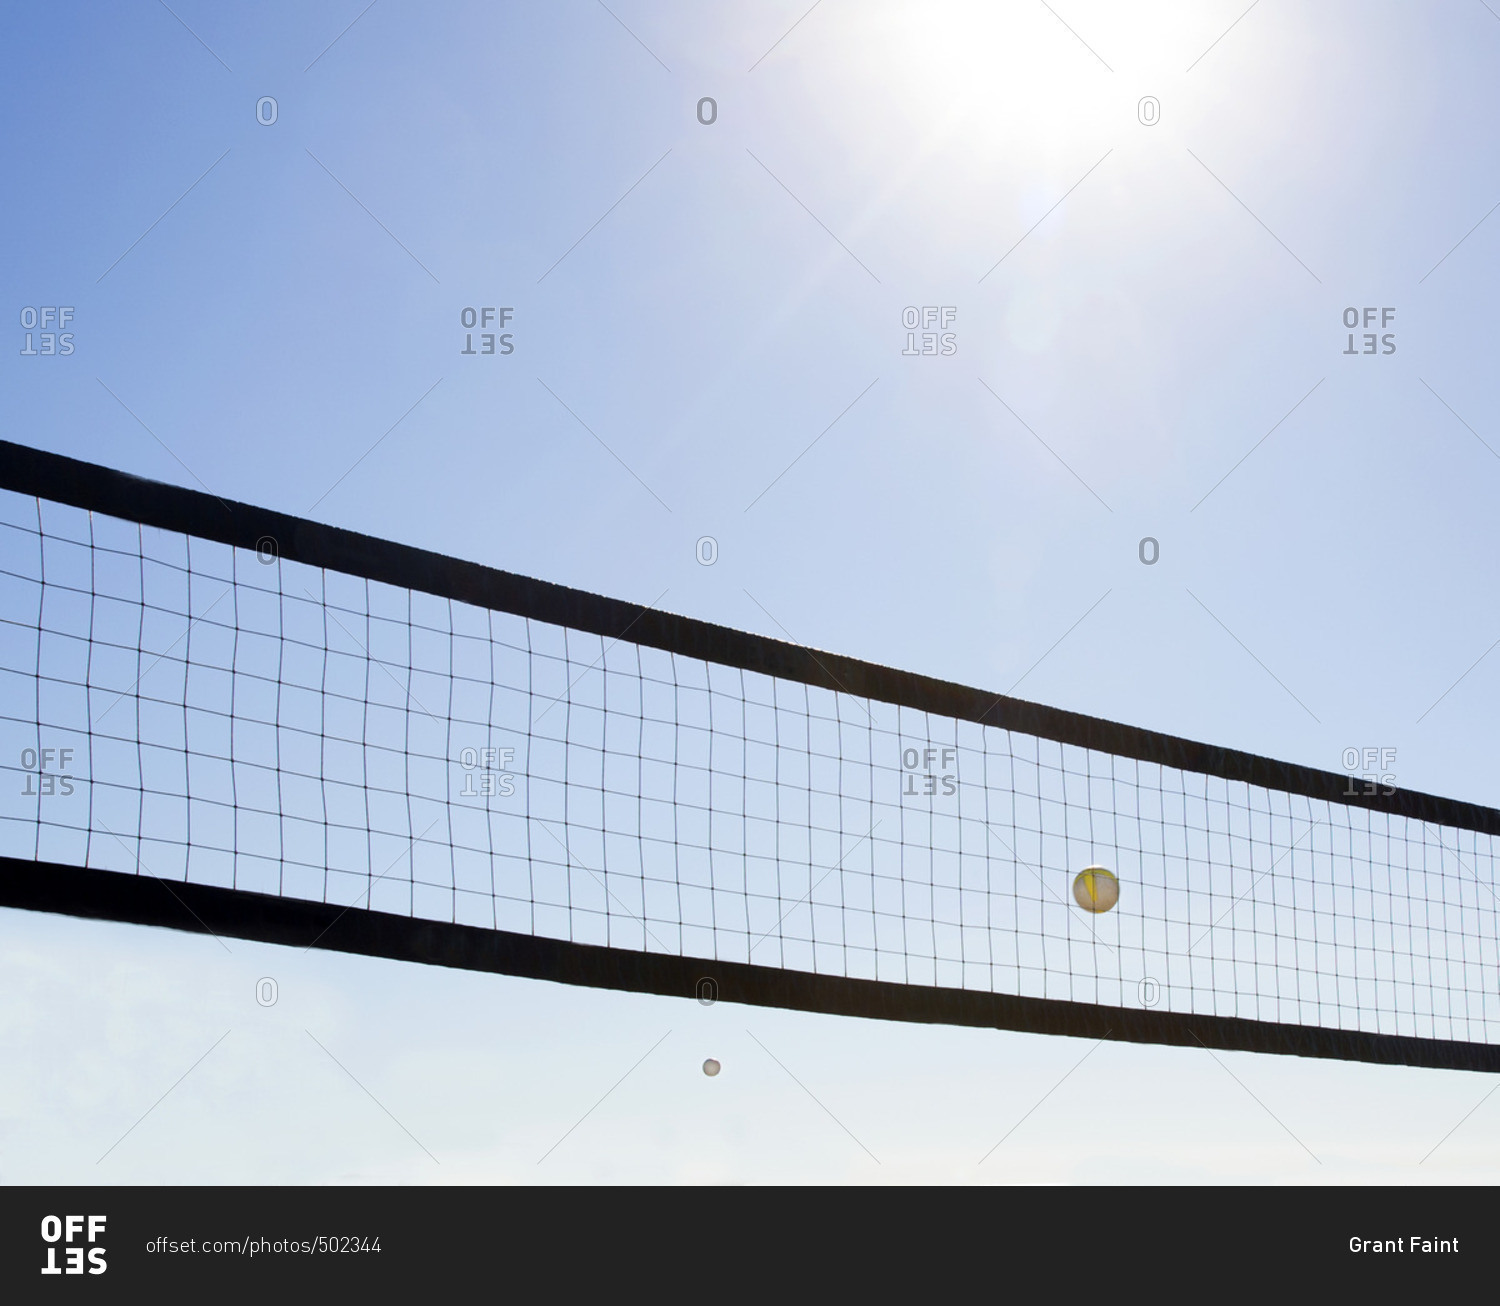 Volleyball net and ball in flight